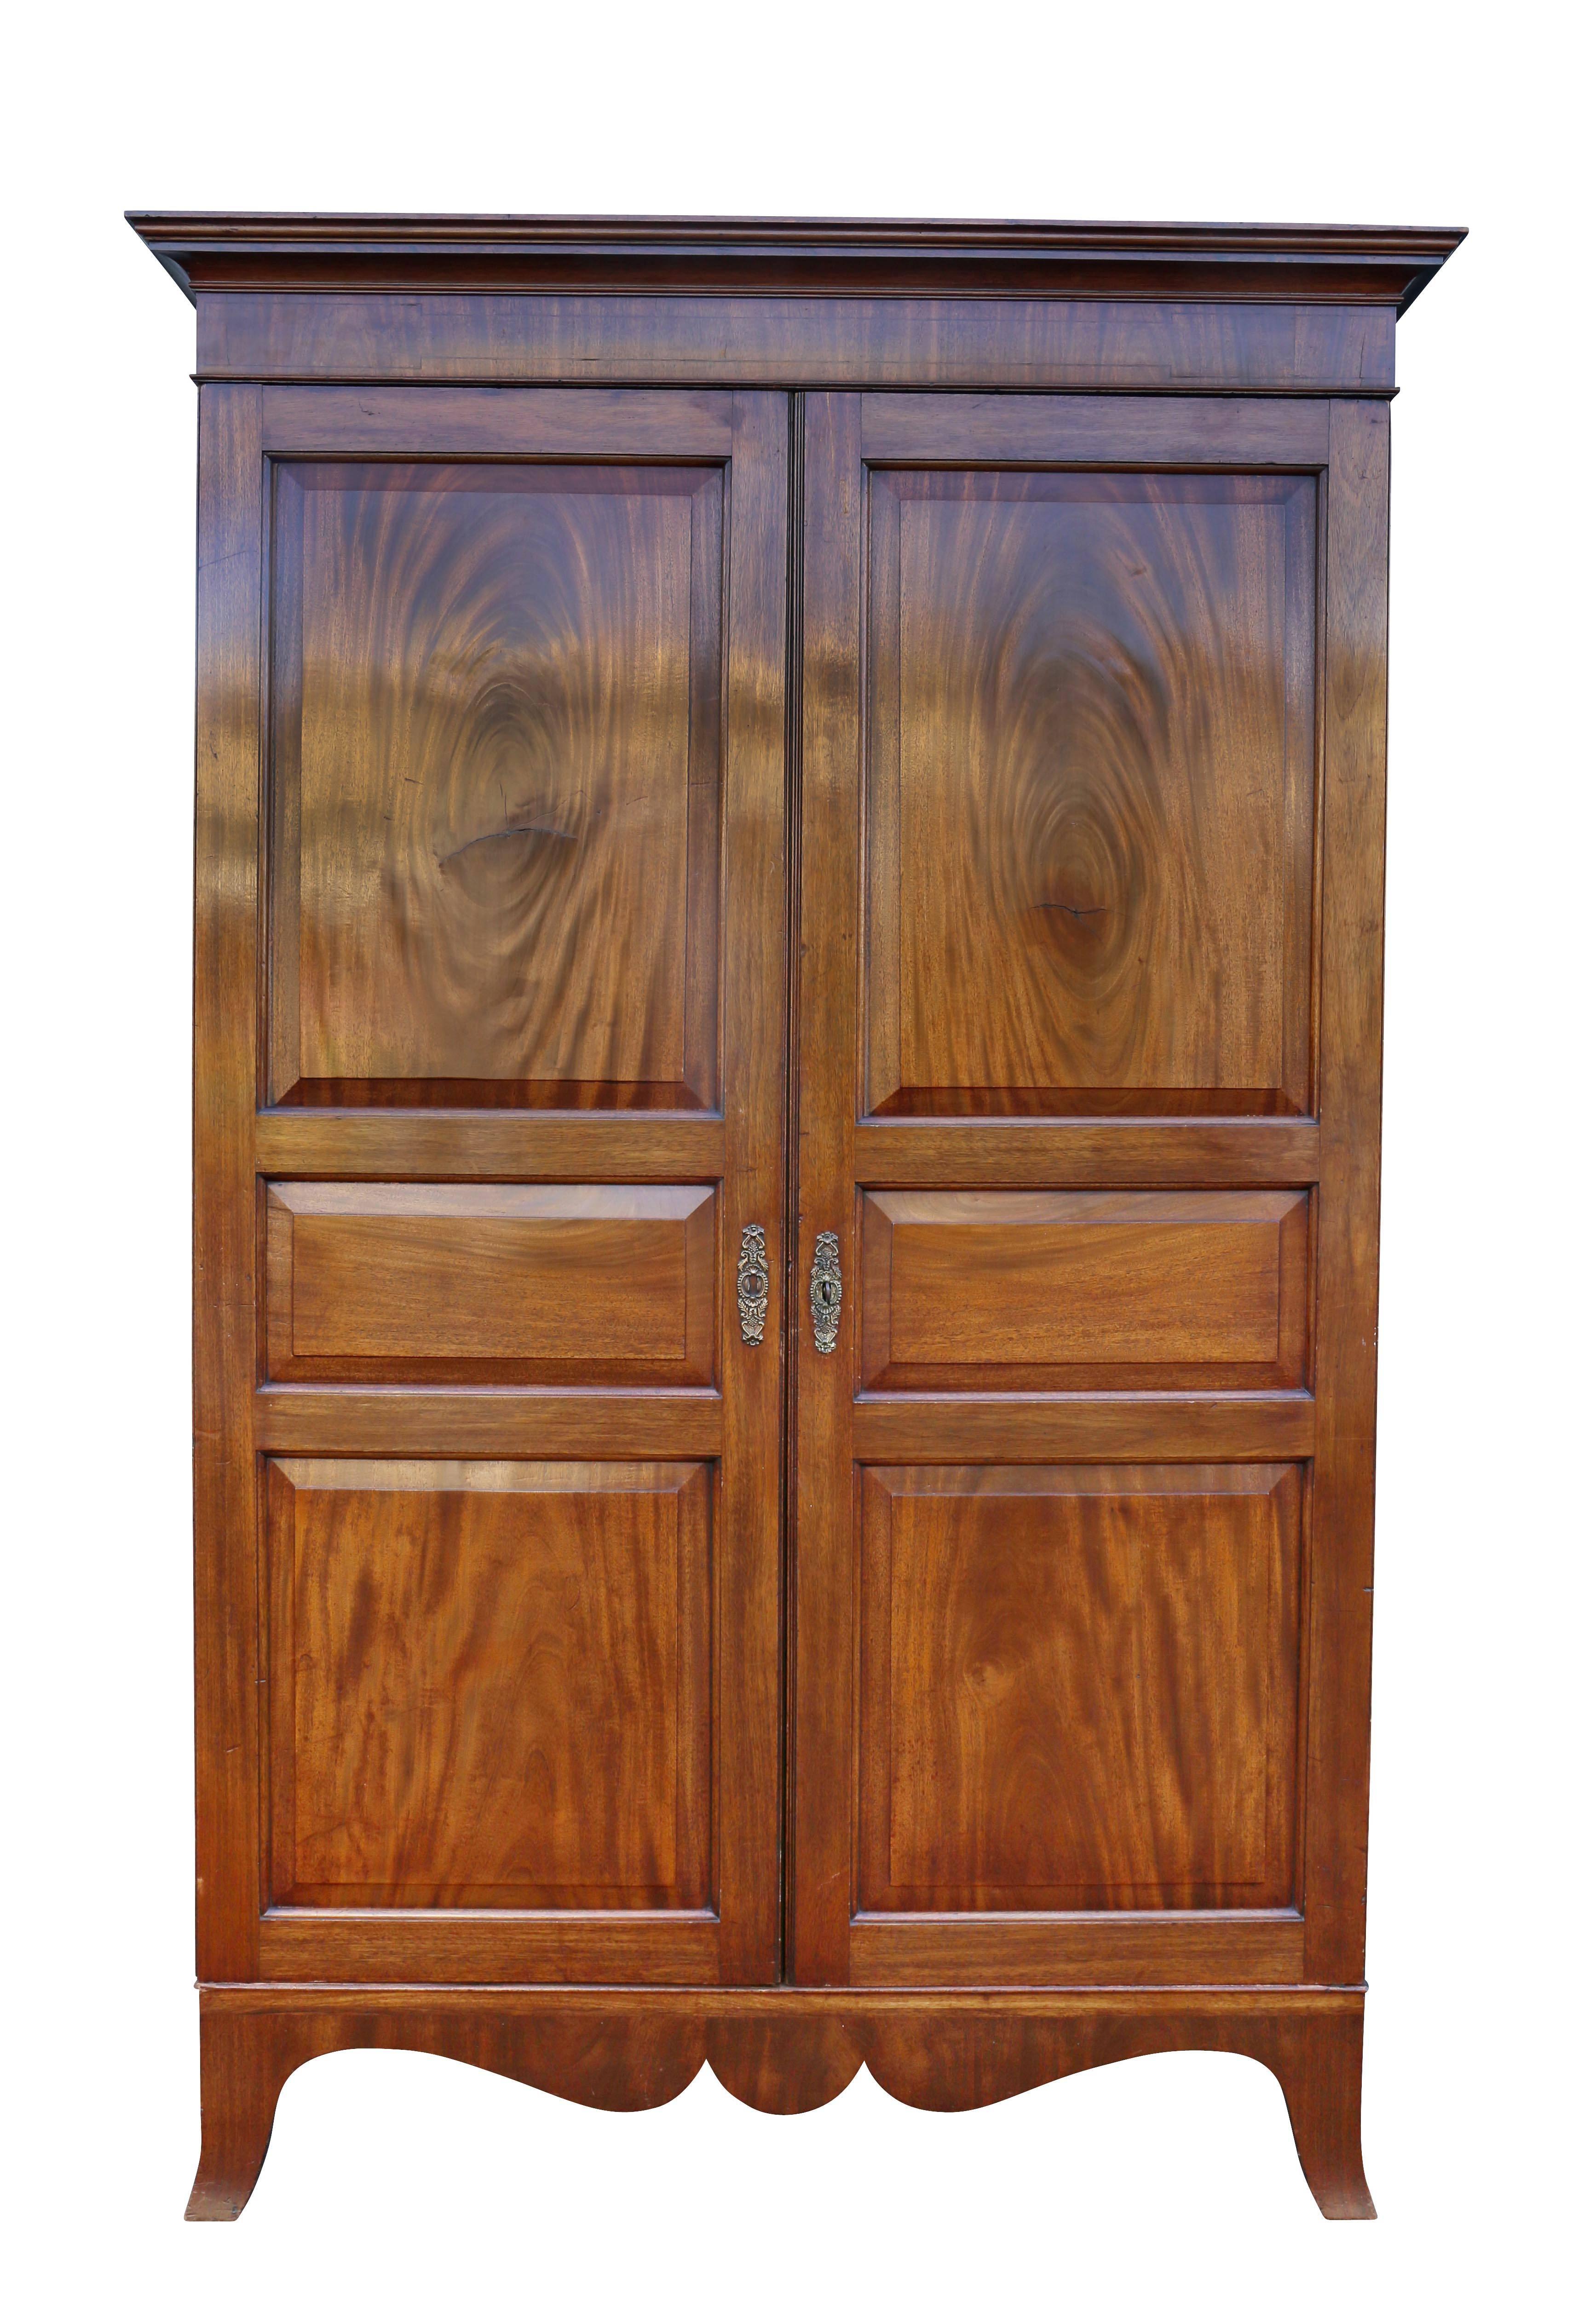 With a dentilled cornice over a pair of panelled doors, sides panelled also, raised on splayed legs. Inside has brass coat rail. Wood nicely figured with a nice color.